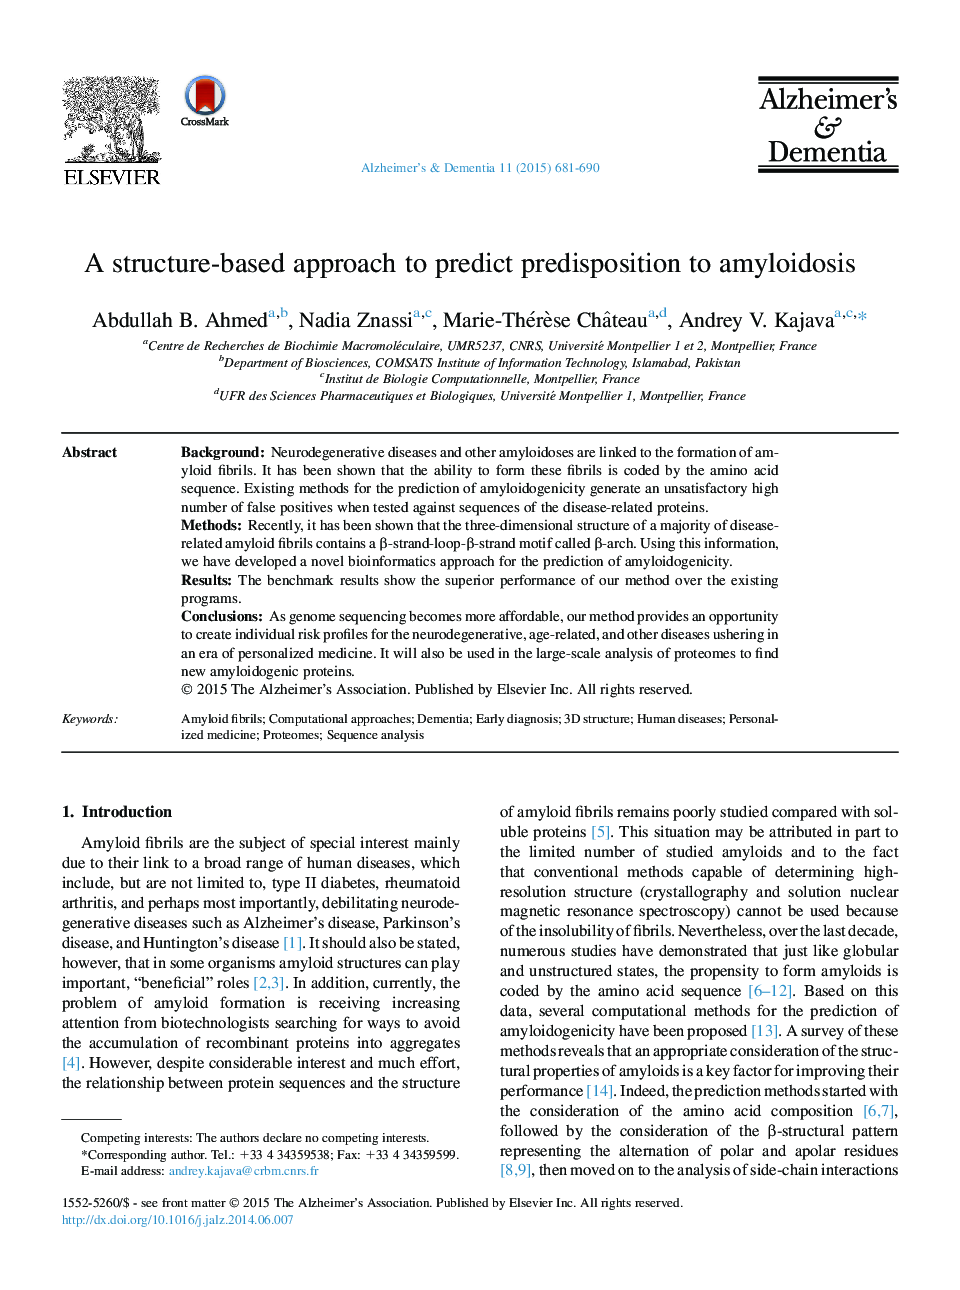 Featured ArticleA structure-based approach to predict predisposition to amyloidosis